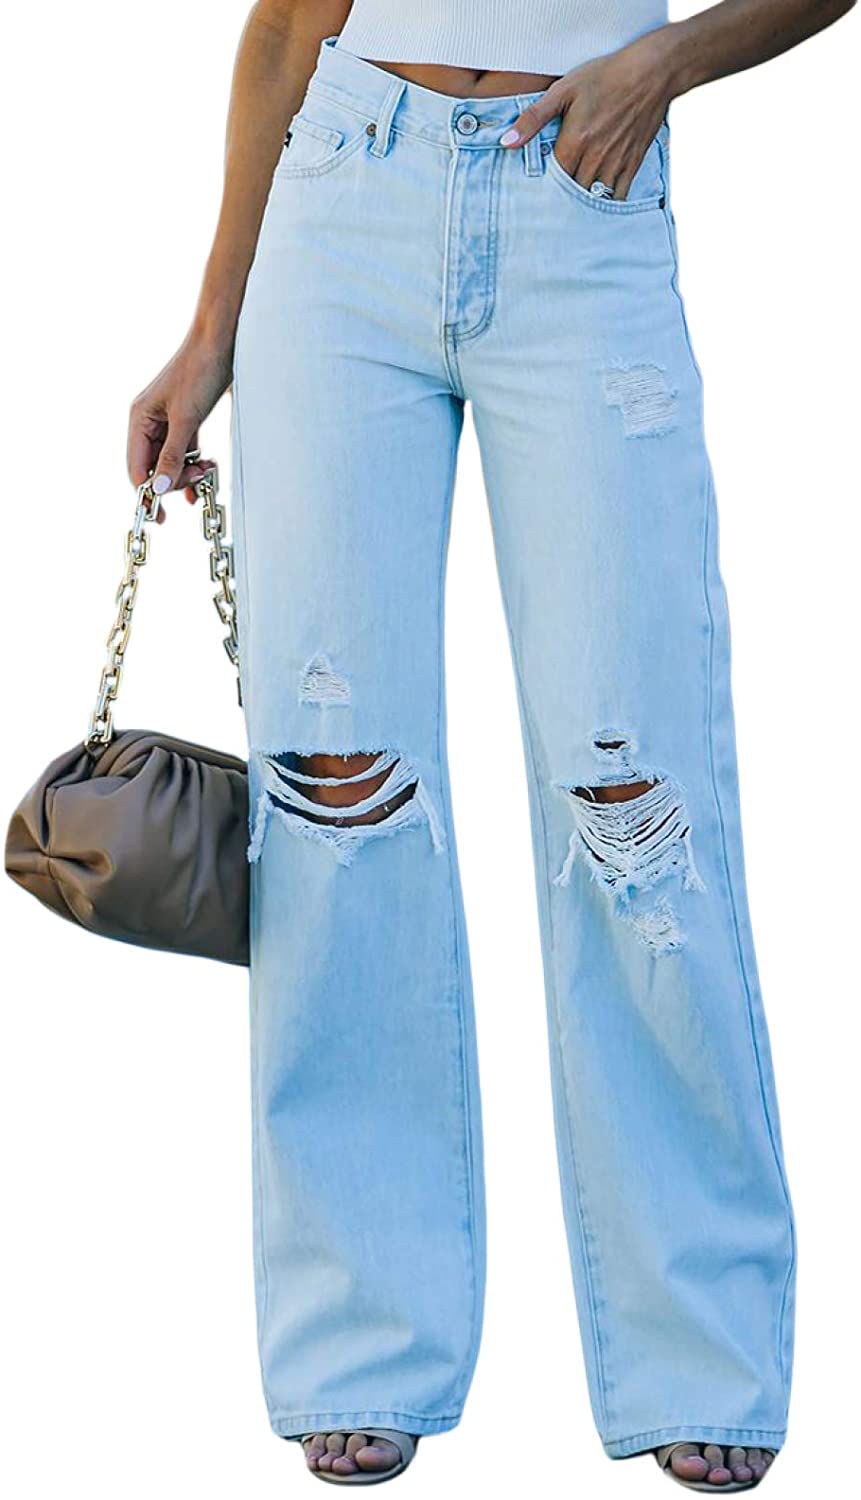 Sidefeel Women High Waist Distressed Flare Jeans Ripped Hole Denim Pants 